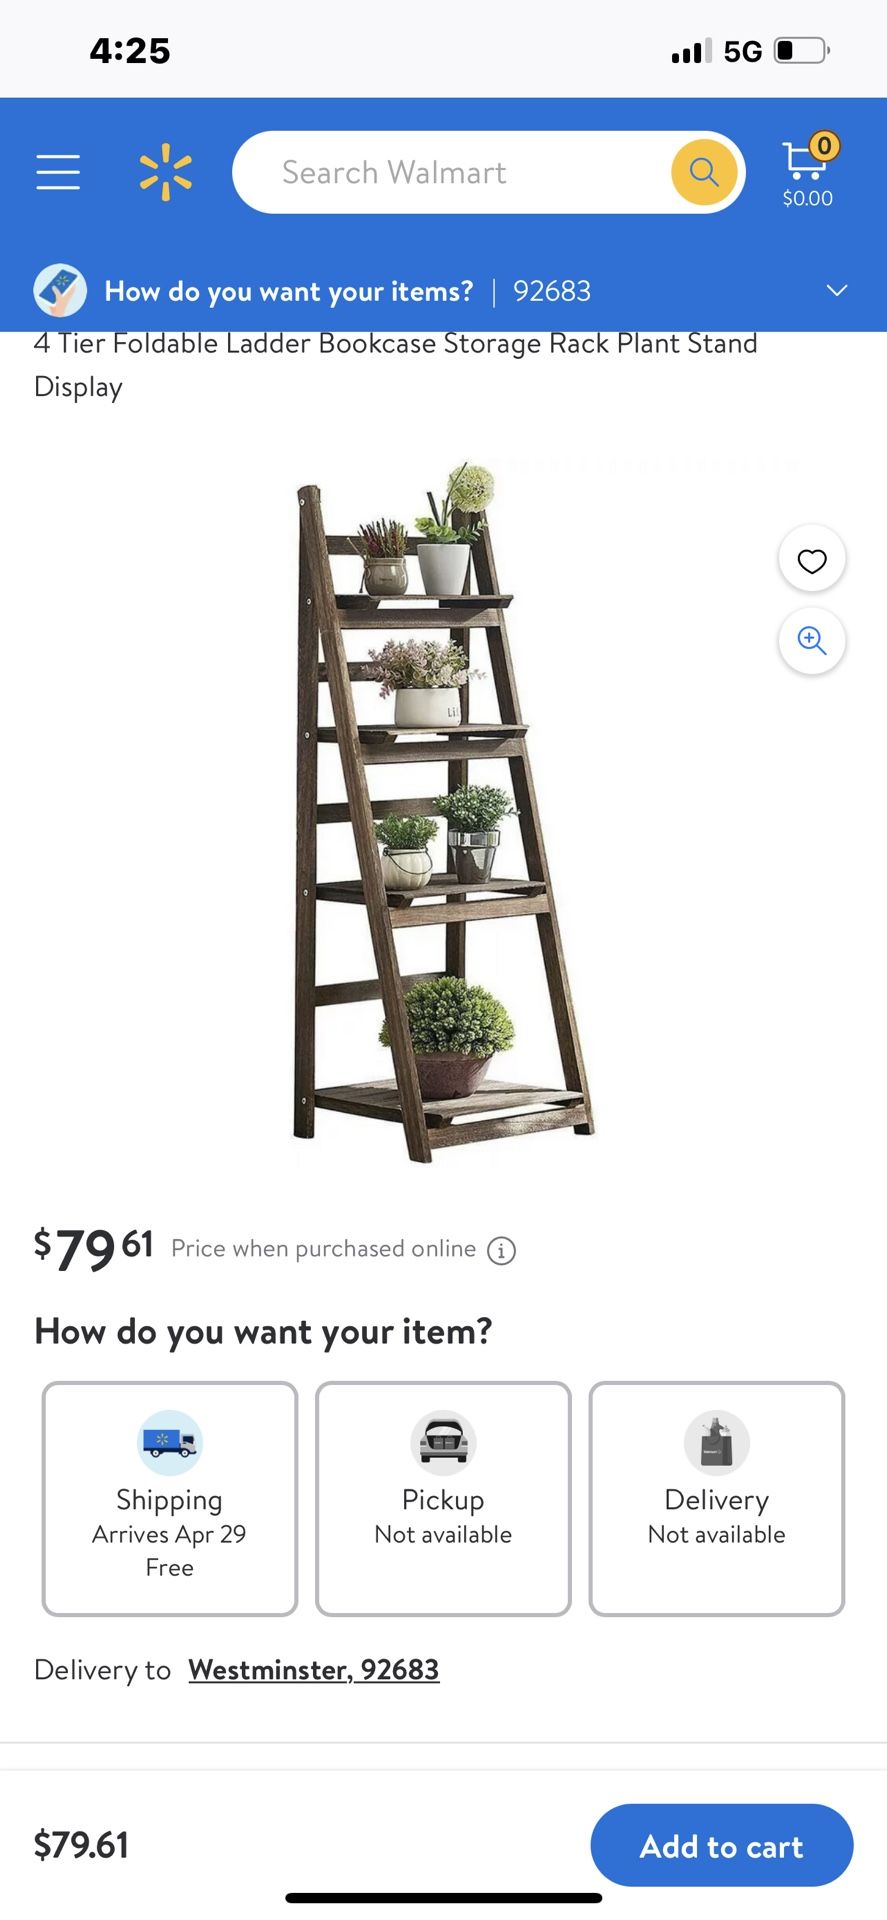 4 Tier Foldable Ladder Bookcase Storage Rack Plant Stand Display